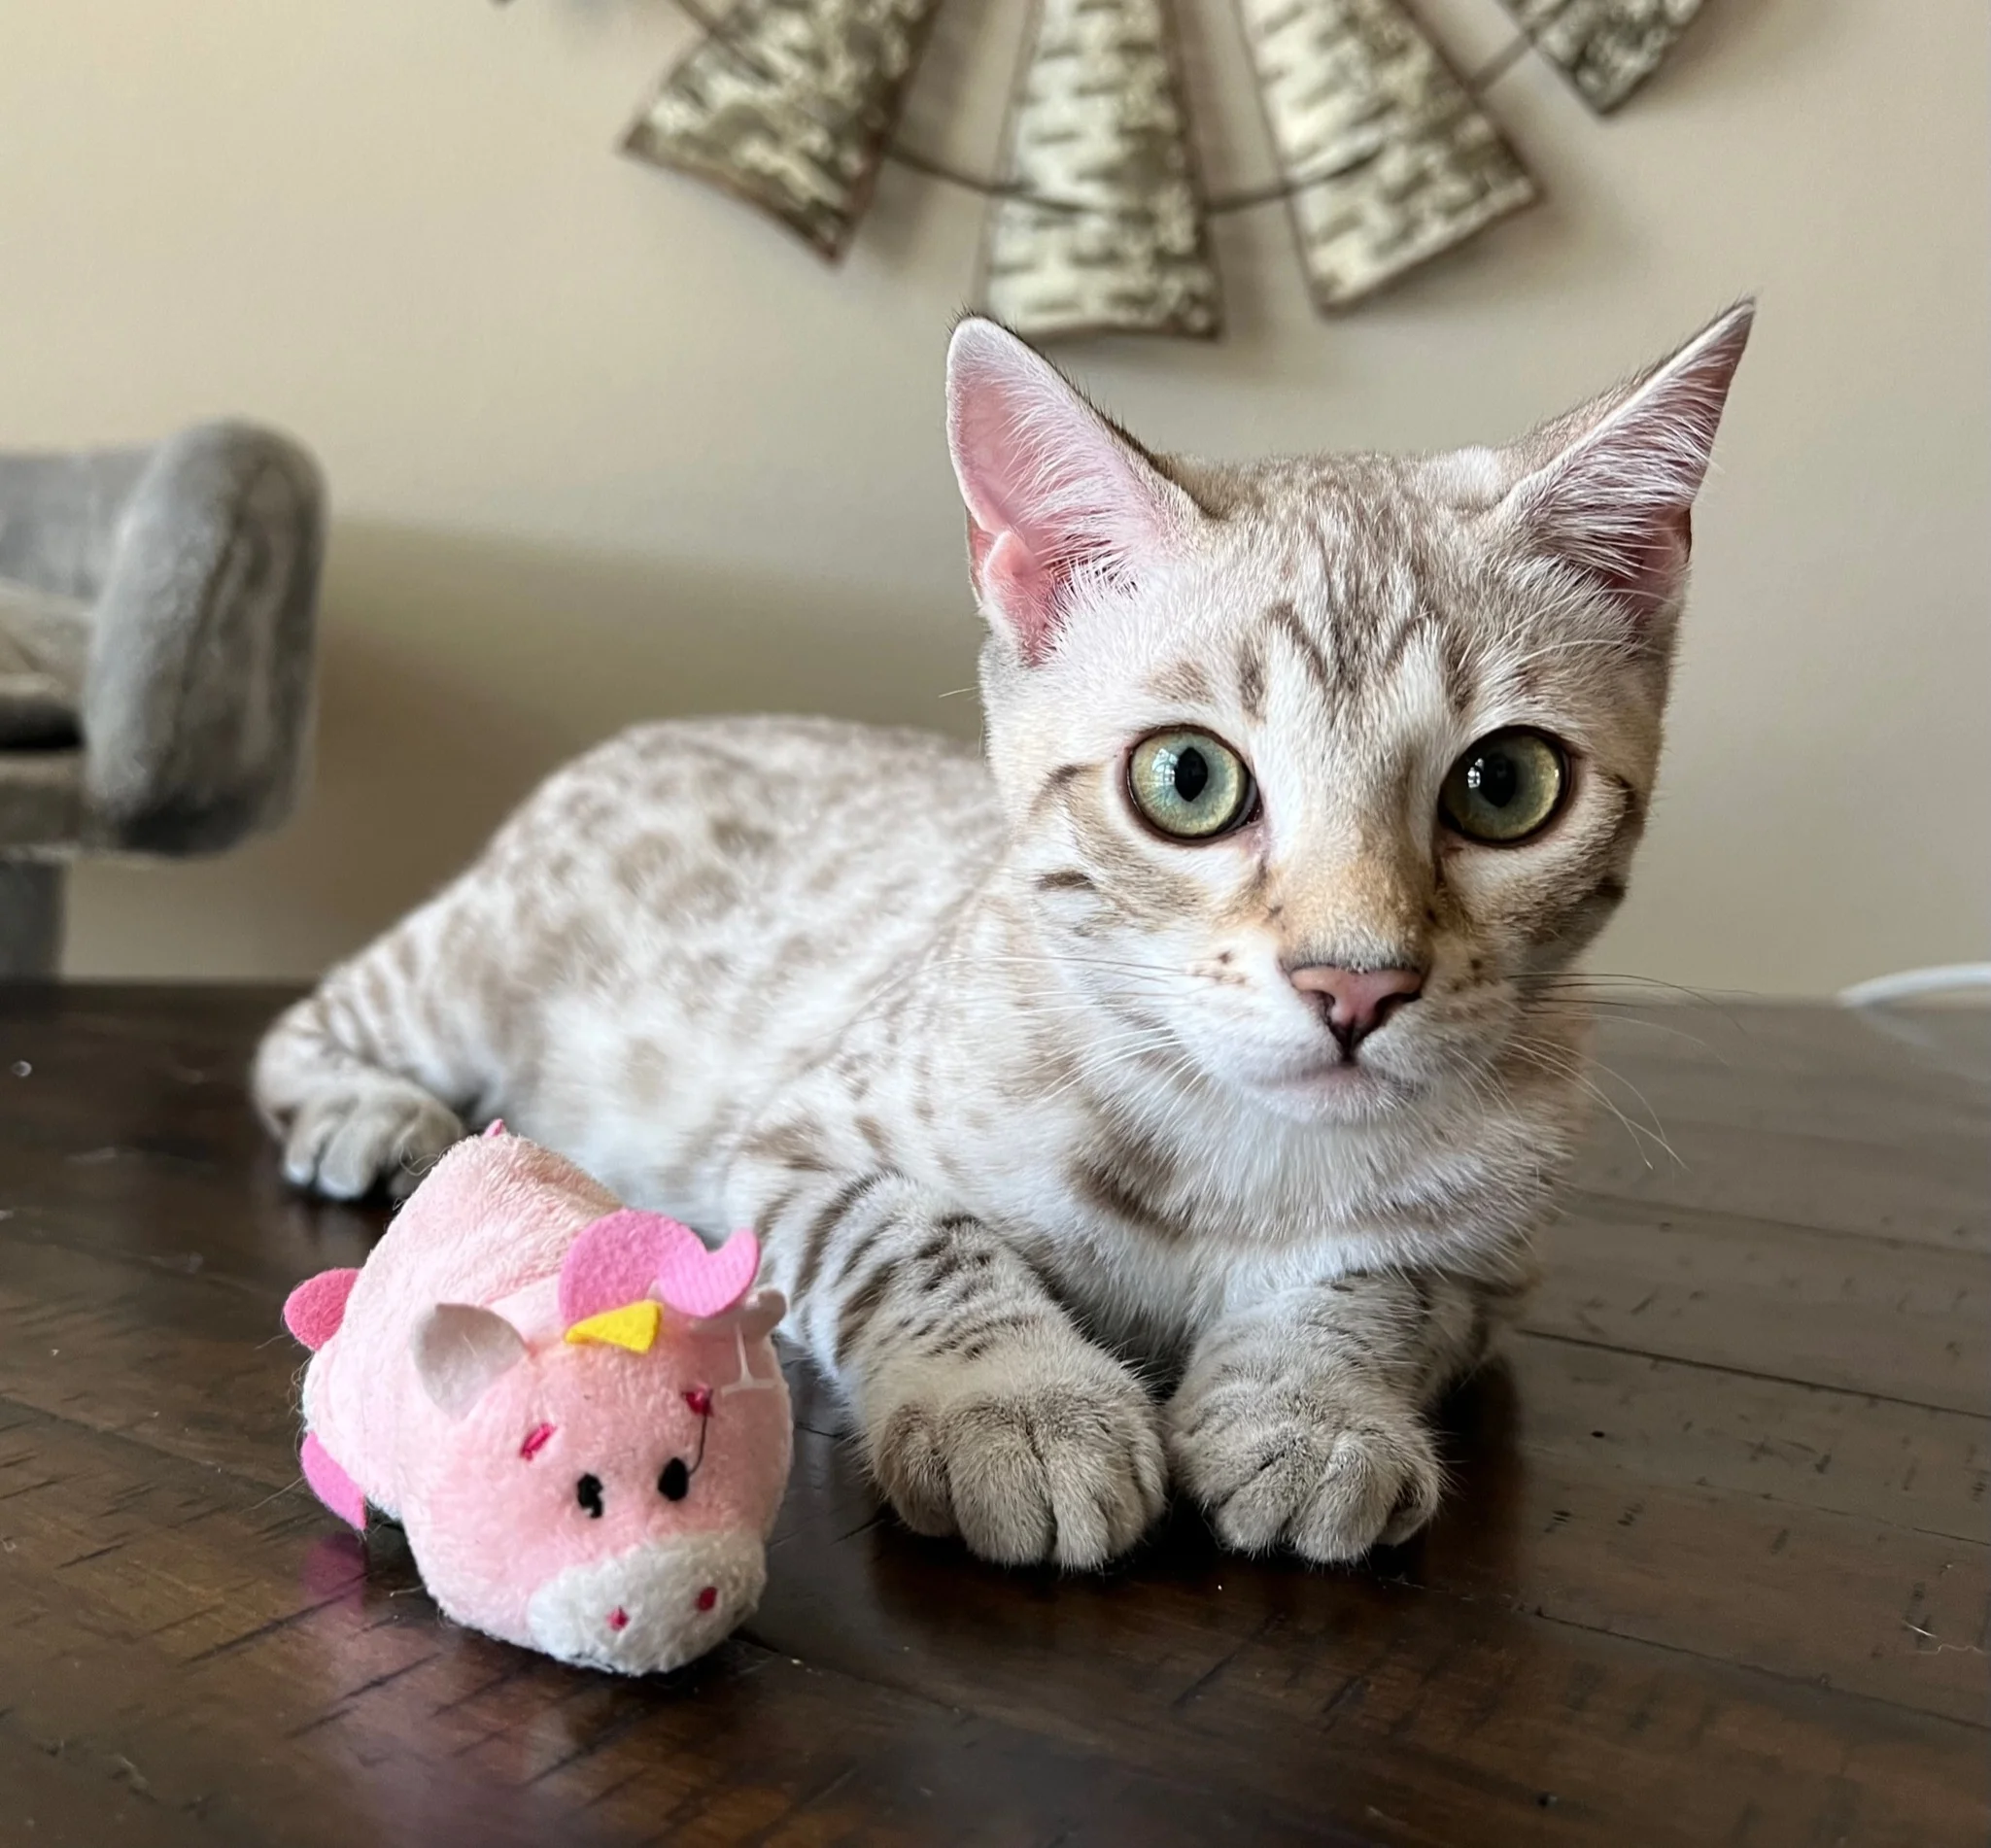 A superior quality Bengal cat is laying on a table next to a stuffed pig.